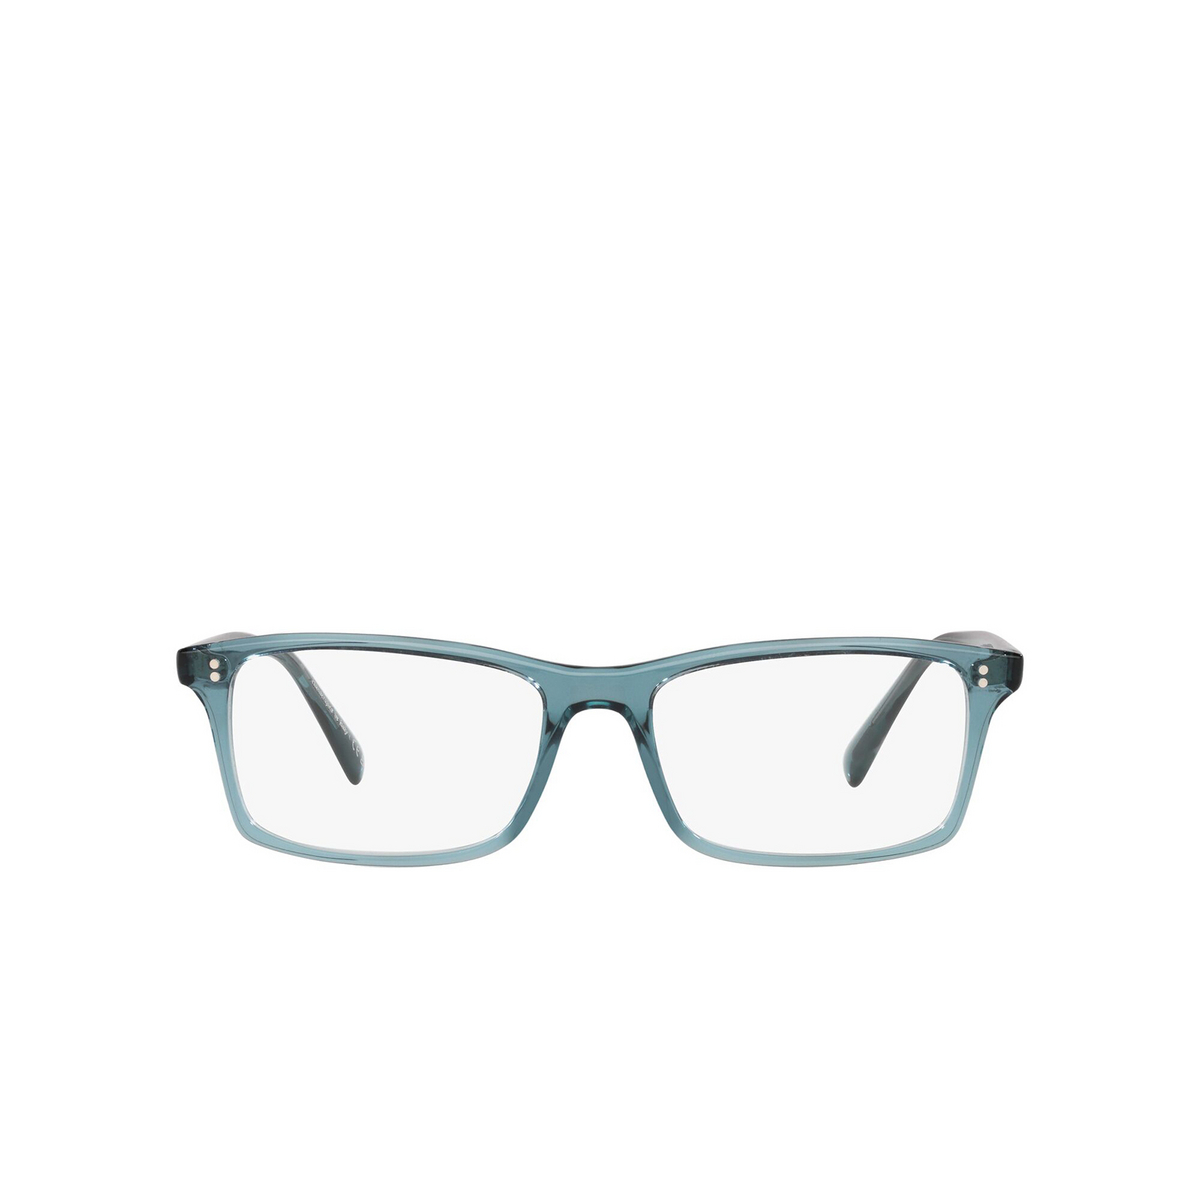 Occhiali da vista Oliver Peoples MYERSON 1617 Washed Teal - frontale